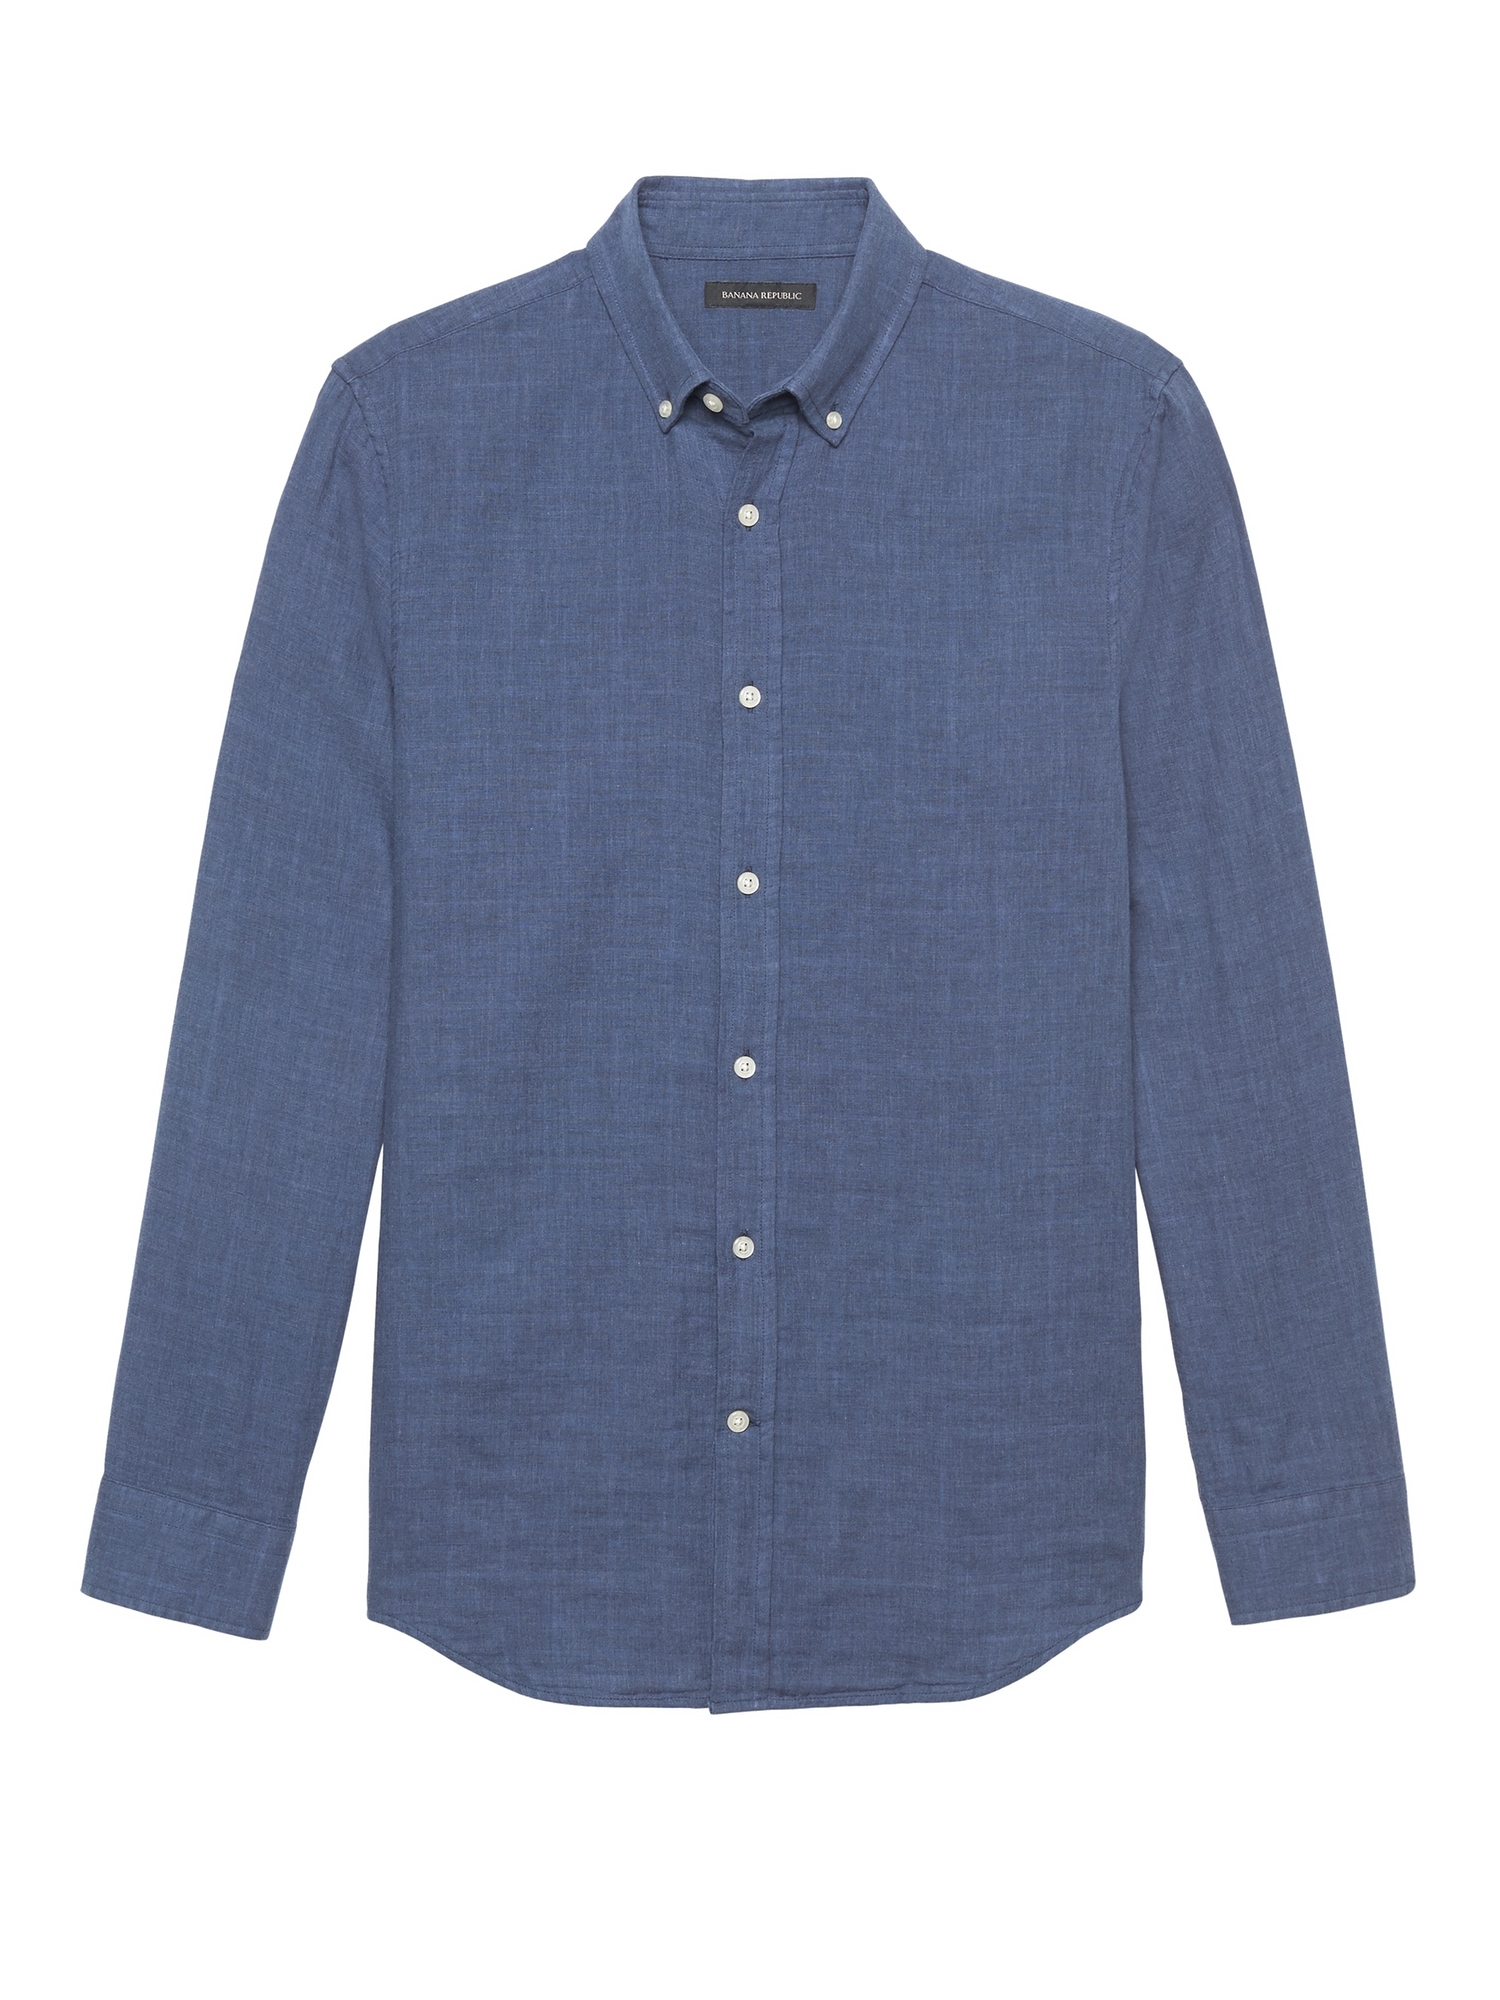 NEW Slim-Fit Double-Weave Shirt